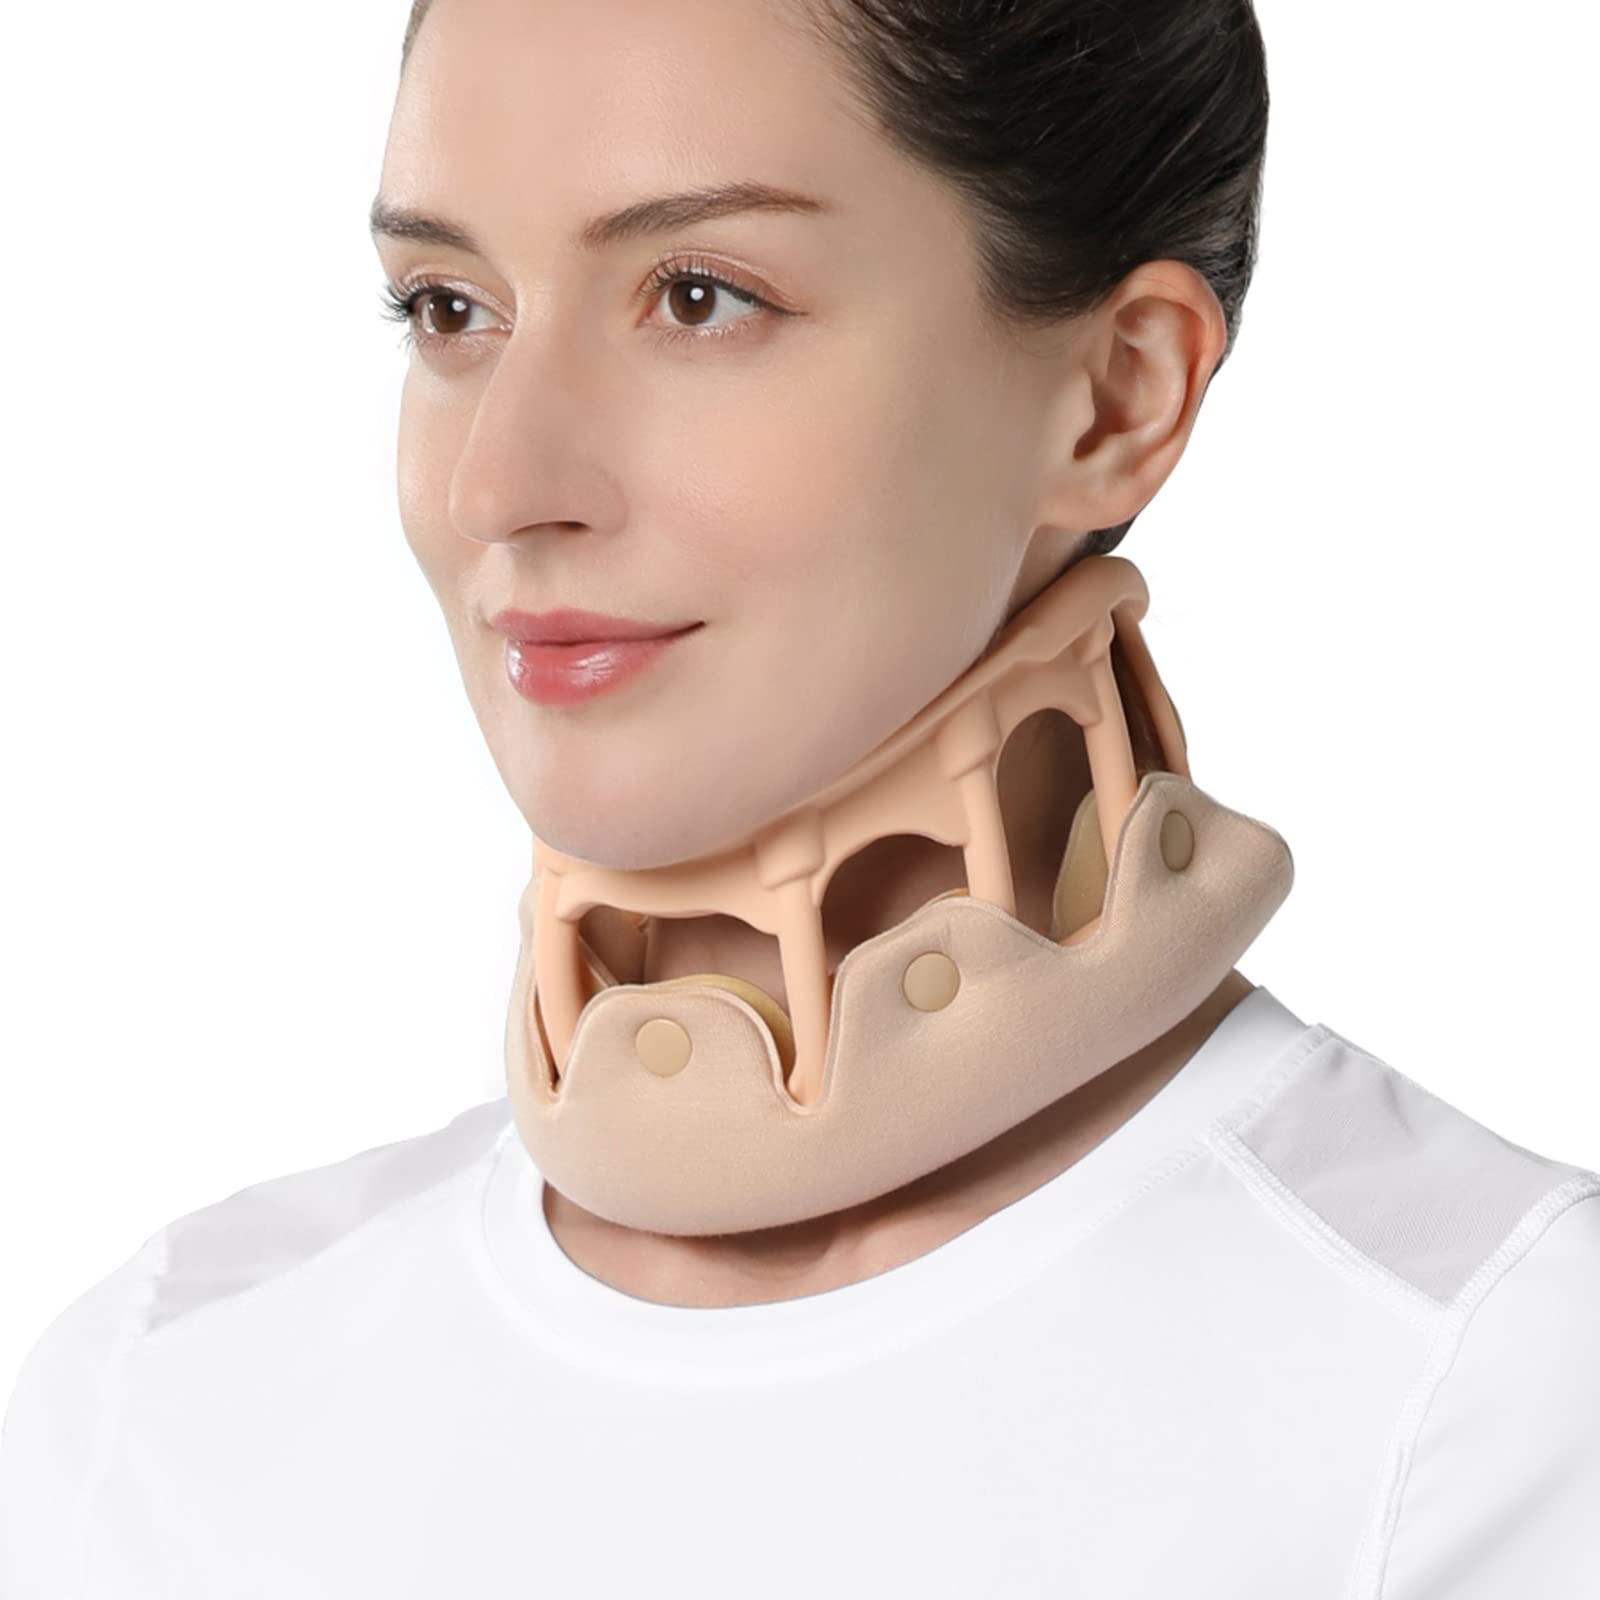 VELPEAU Neck Brace - Silicone Cervical Collar Support for Neck